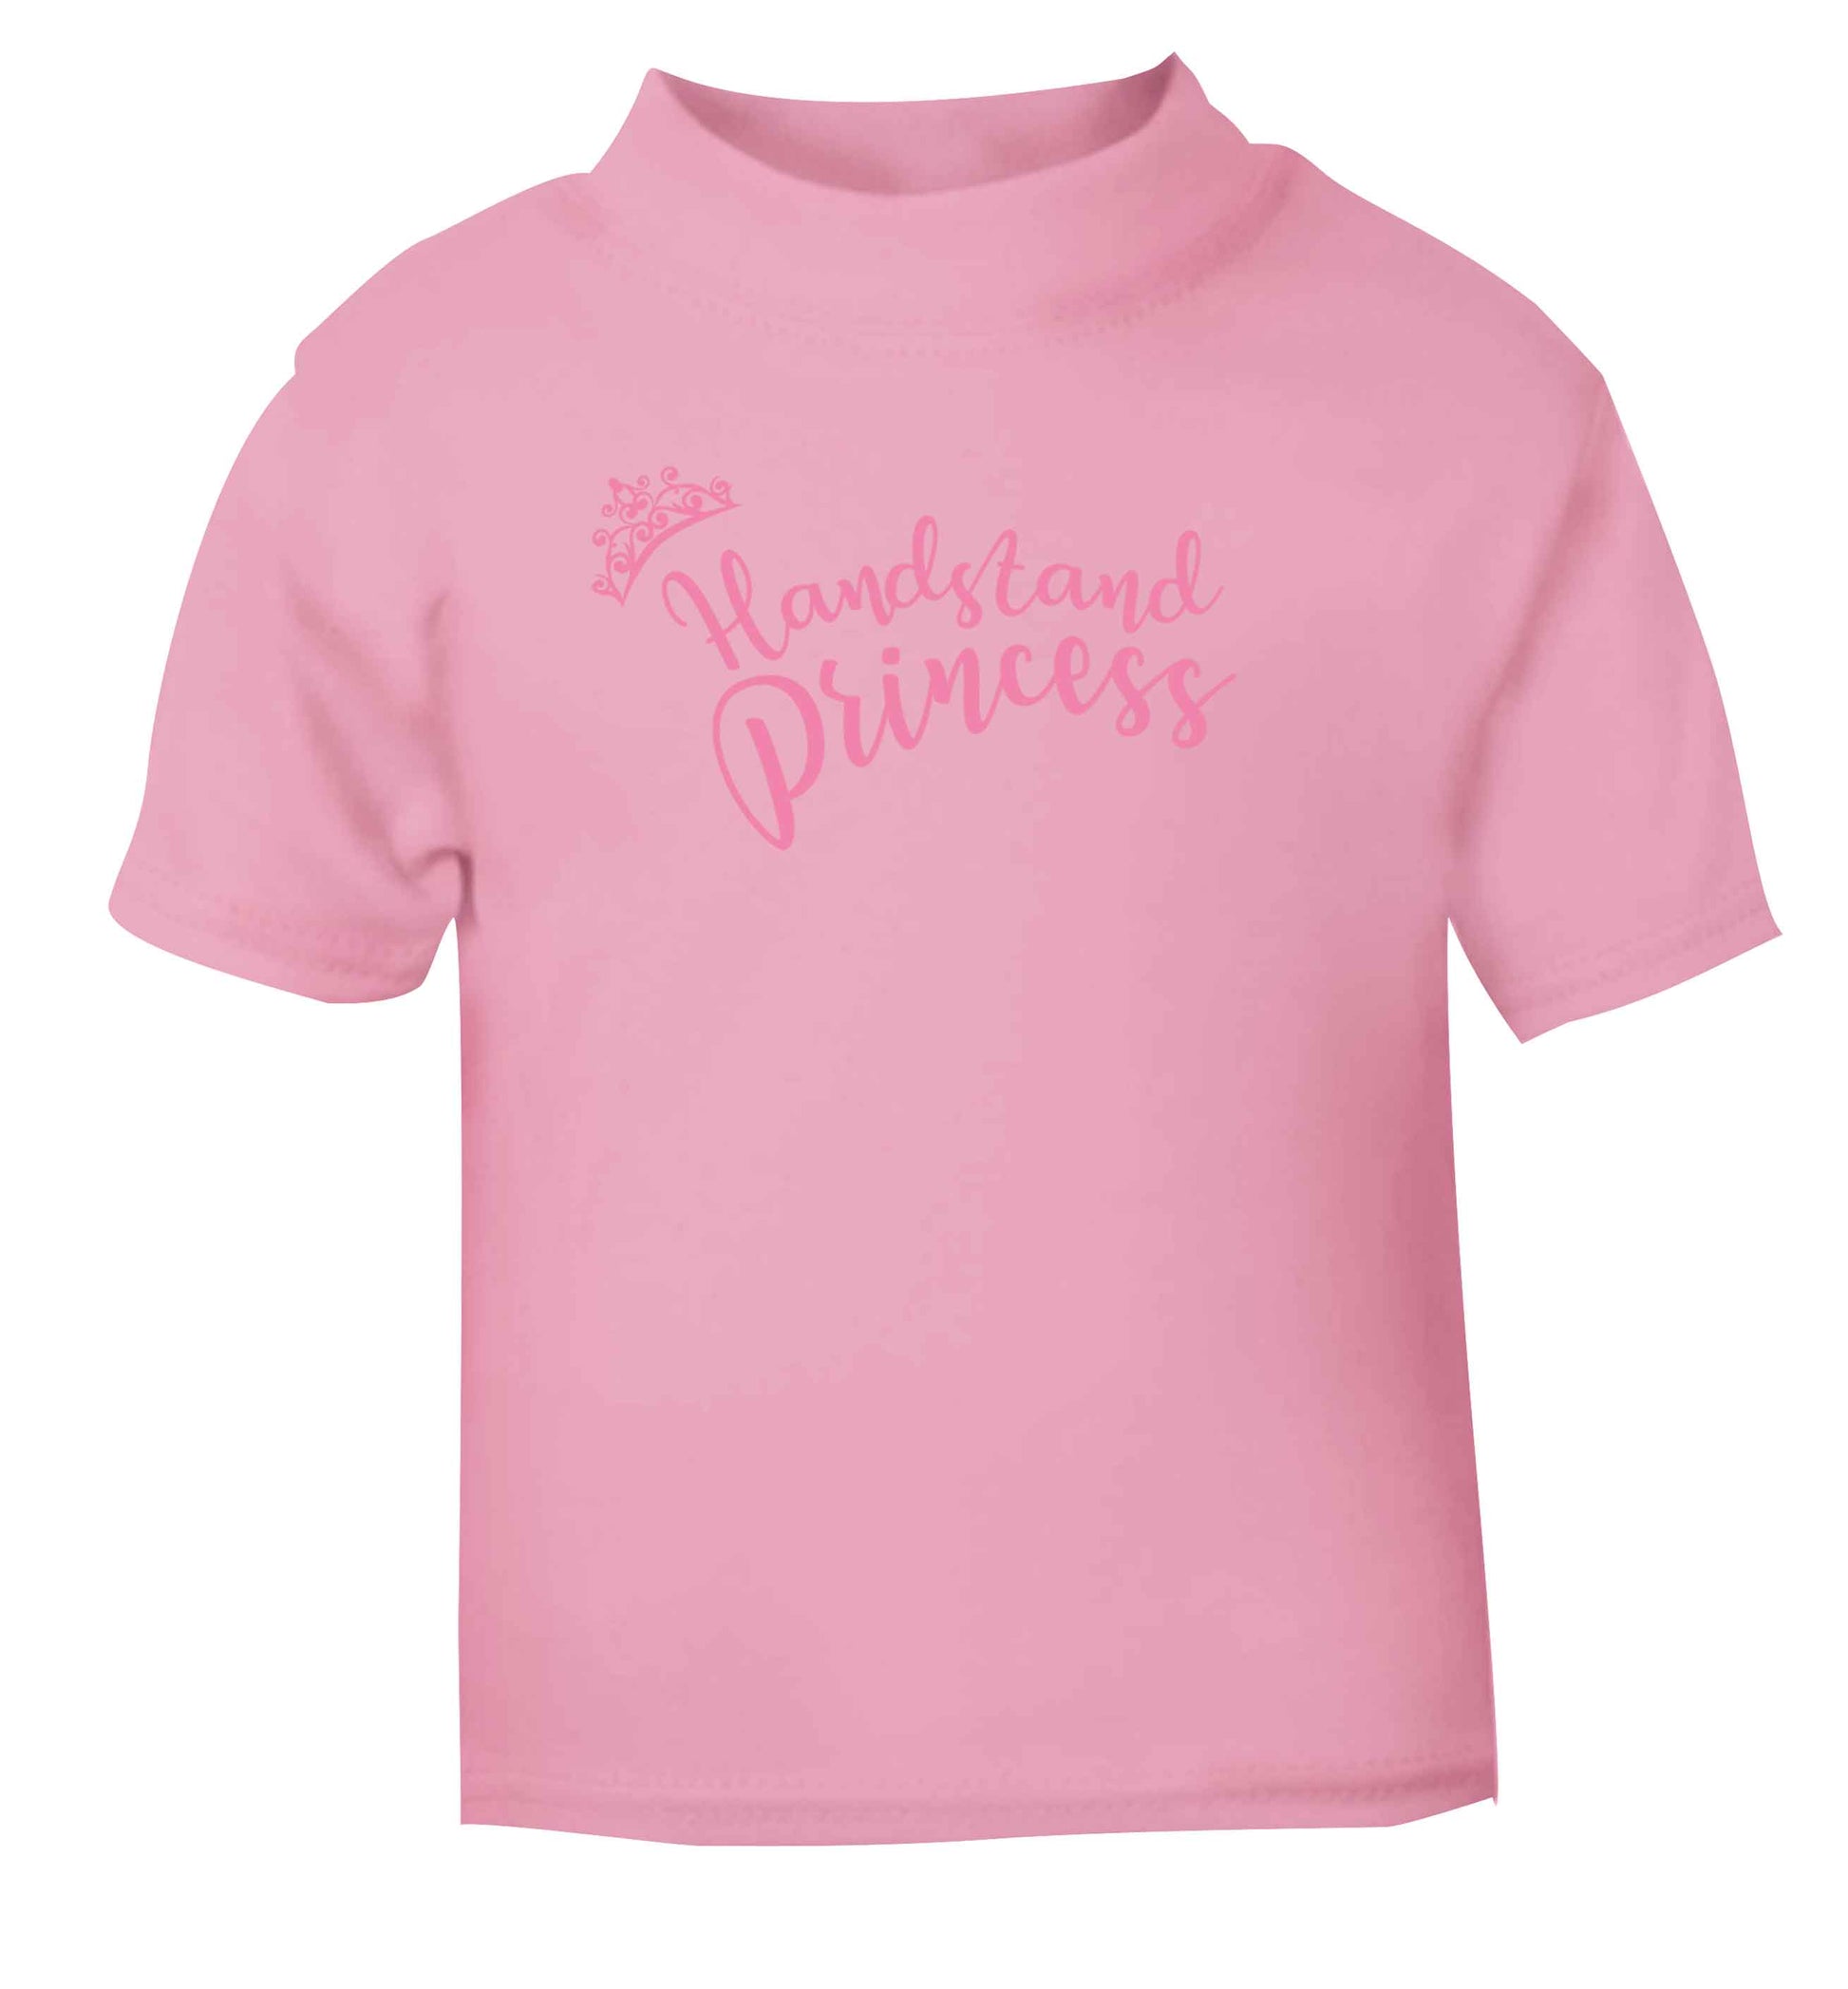 Handstand princess light pink Baby Toddler Tshirt 2 Years